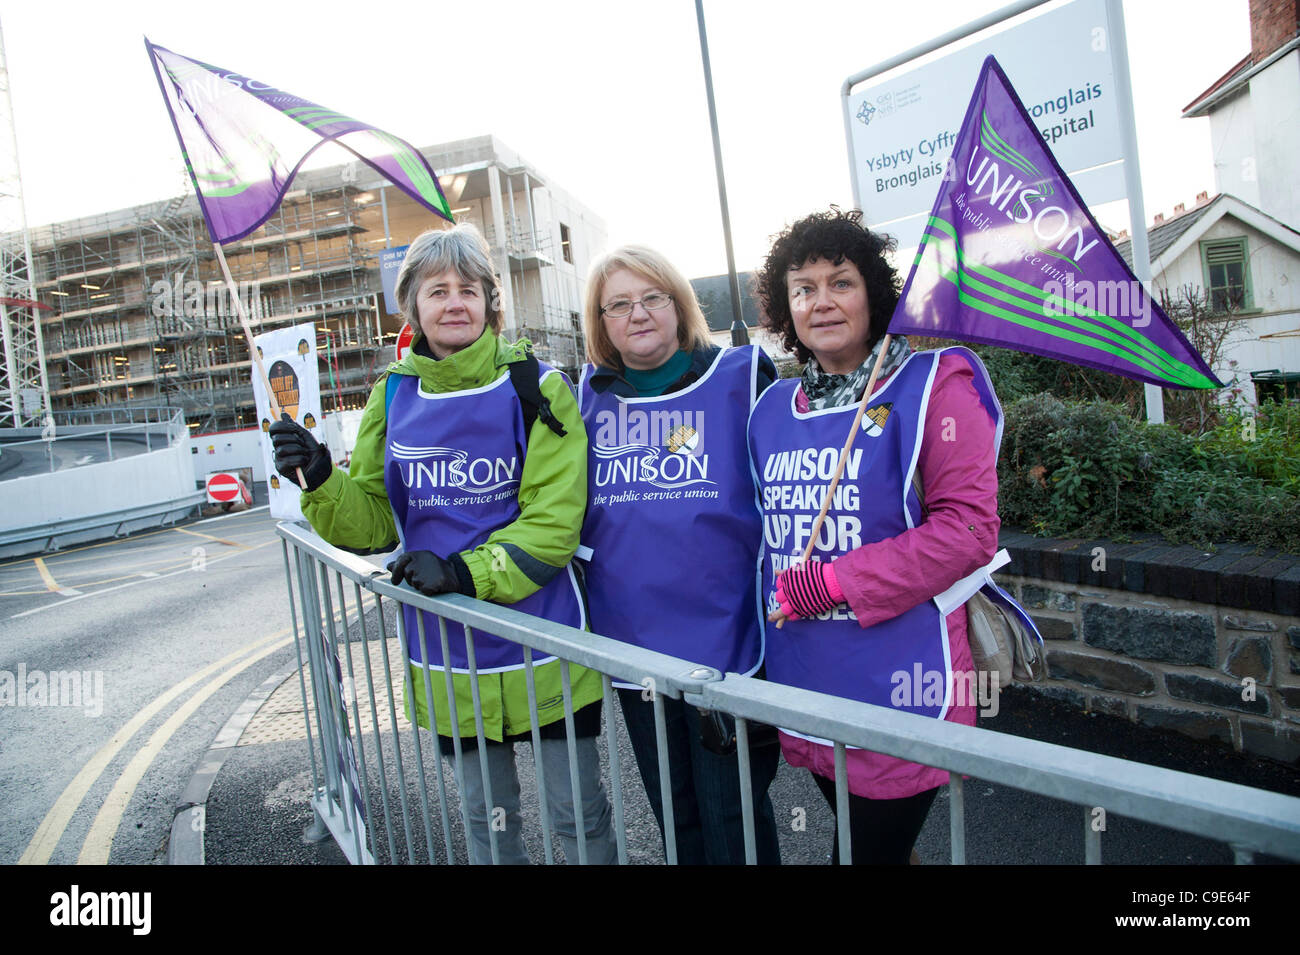 Aberystwyth, UK, Nov 30th, 2011. Union members picketing outside Bronglais General Hospital,Aberystwyth. An estimated 2 million public sector union members went on a one-day strike to protest at threats to their pension provision. Stock Photo